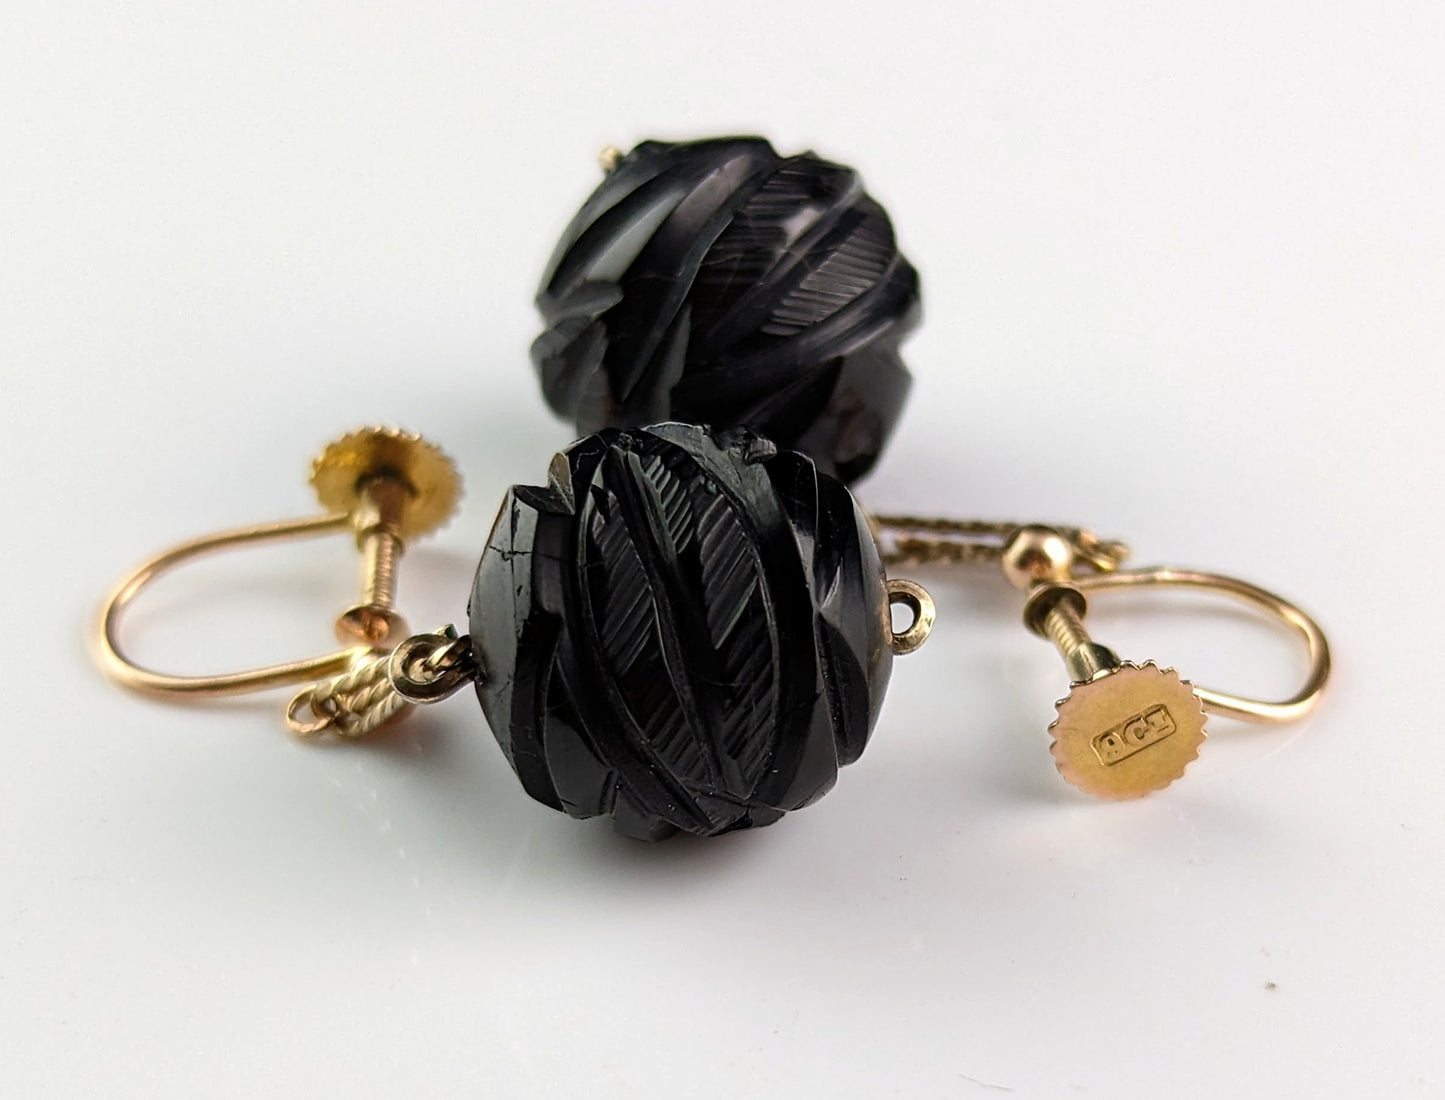 Antique Victorian Whitby Jet earrings, 9ct gold, Screw back